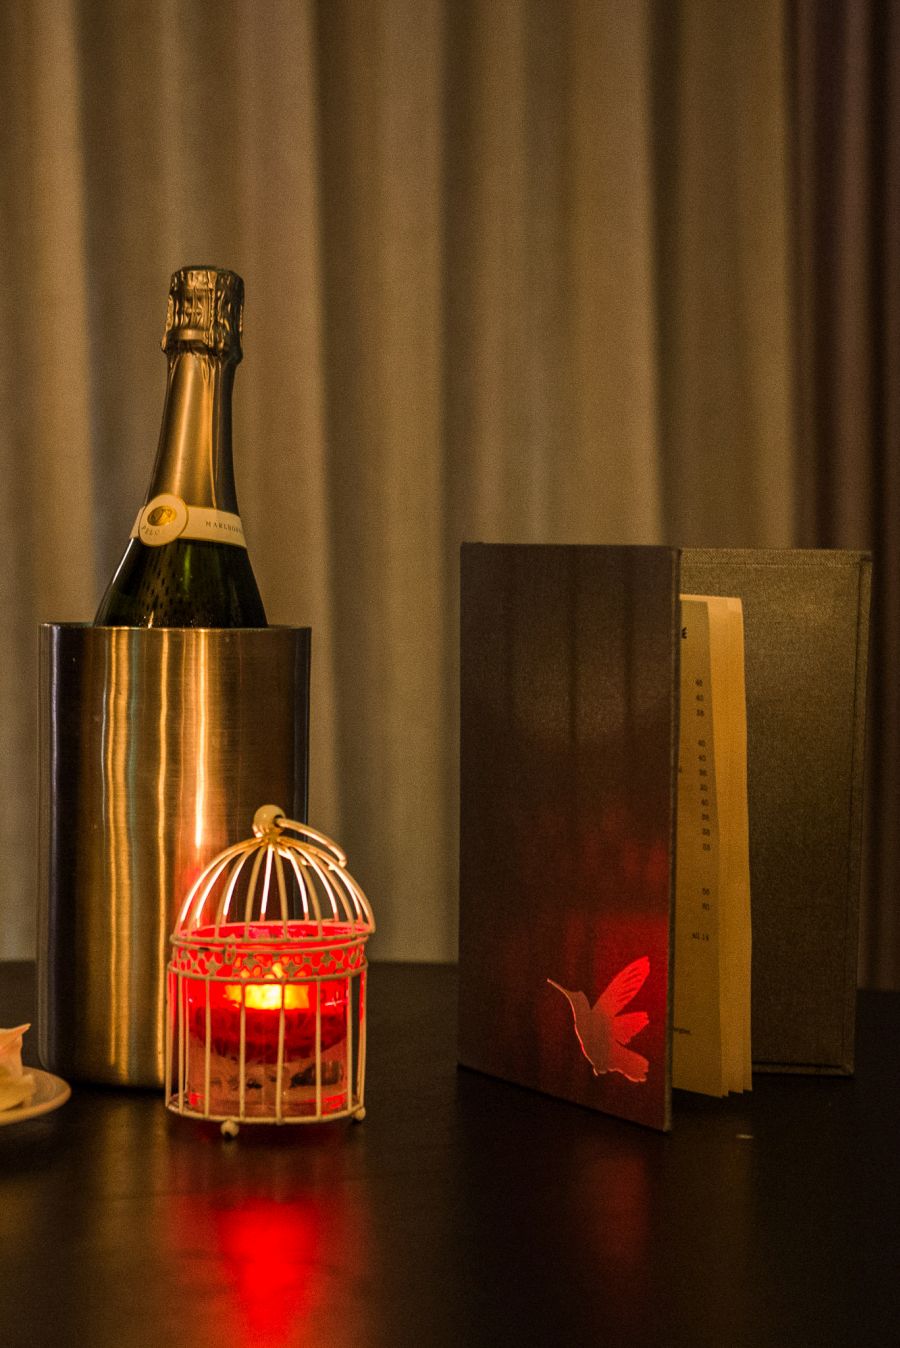 Champagne, lamp and menu - The Aviary